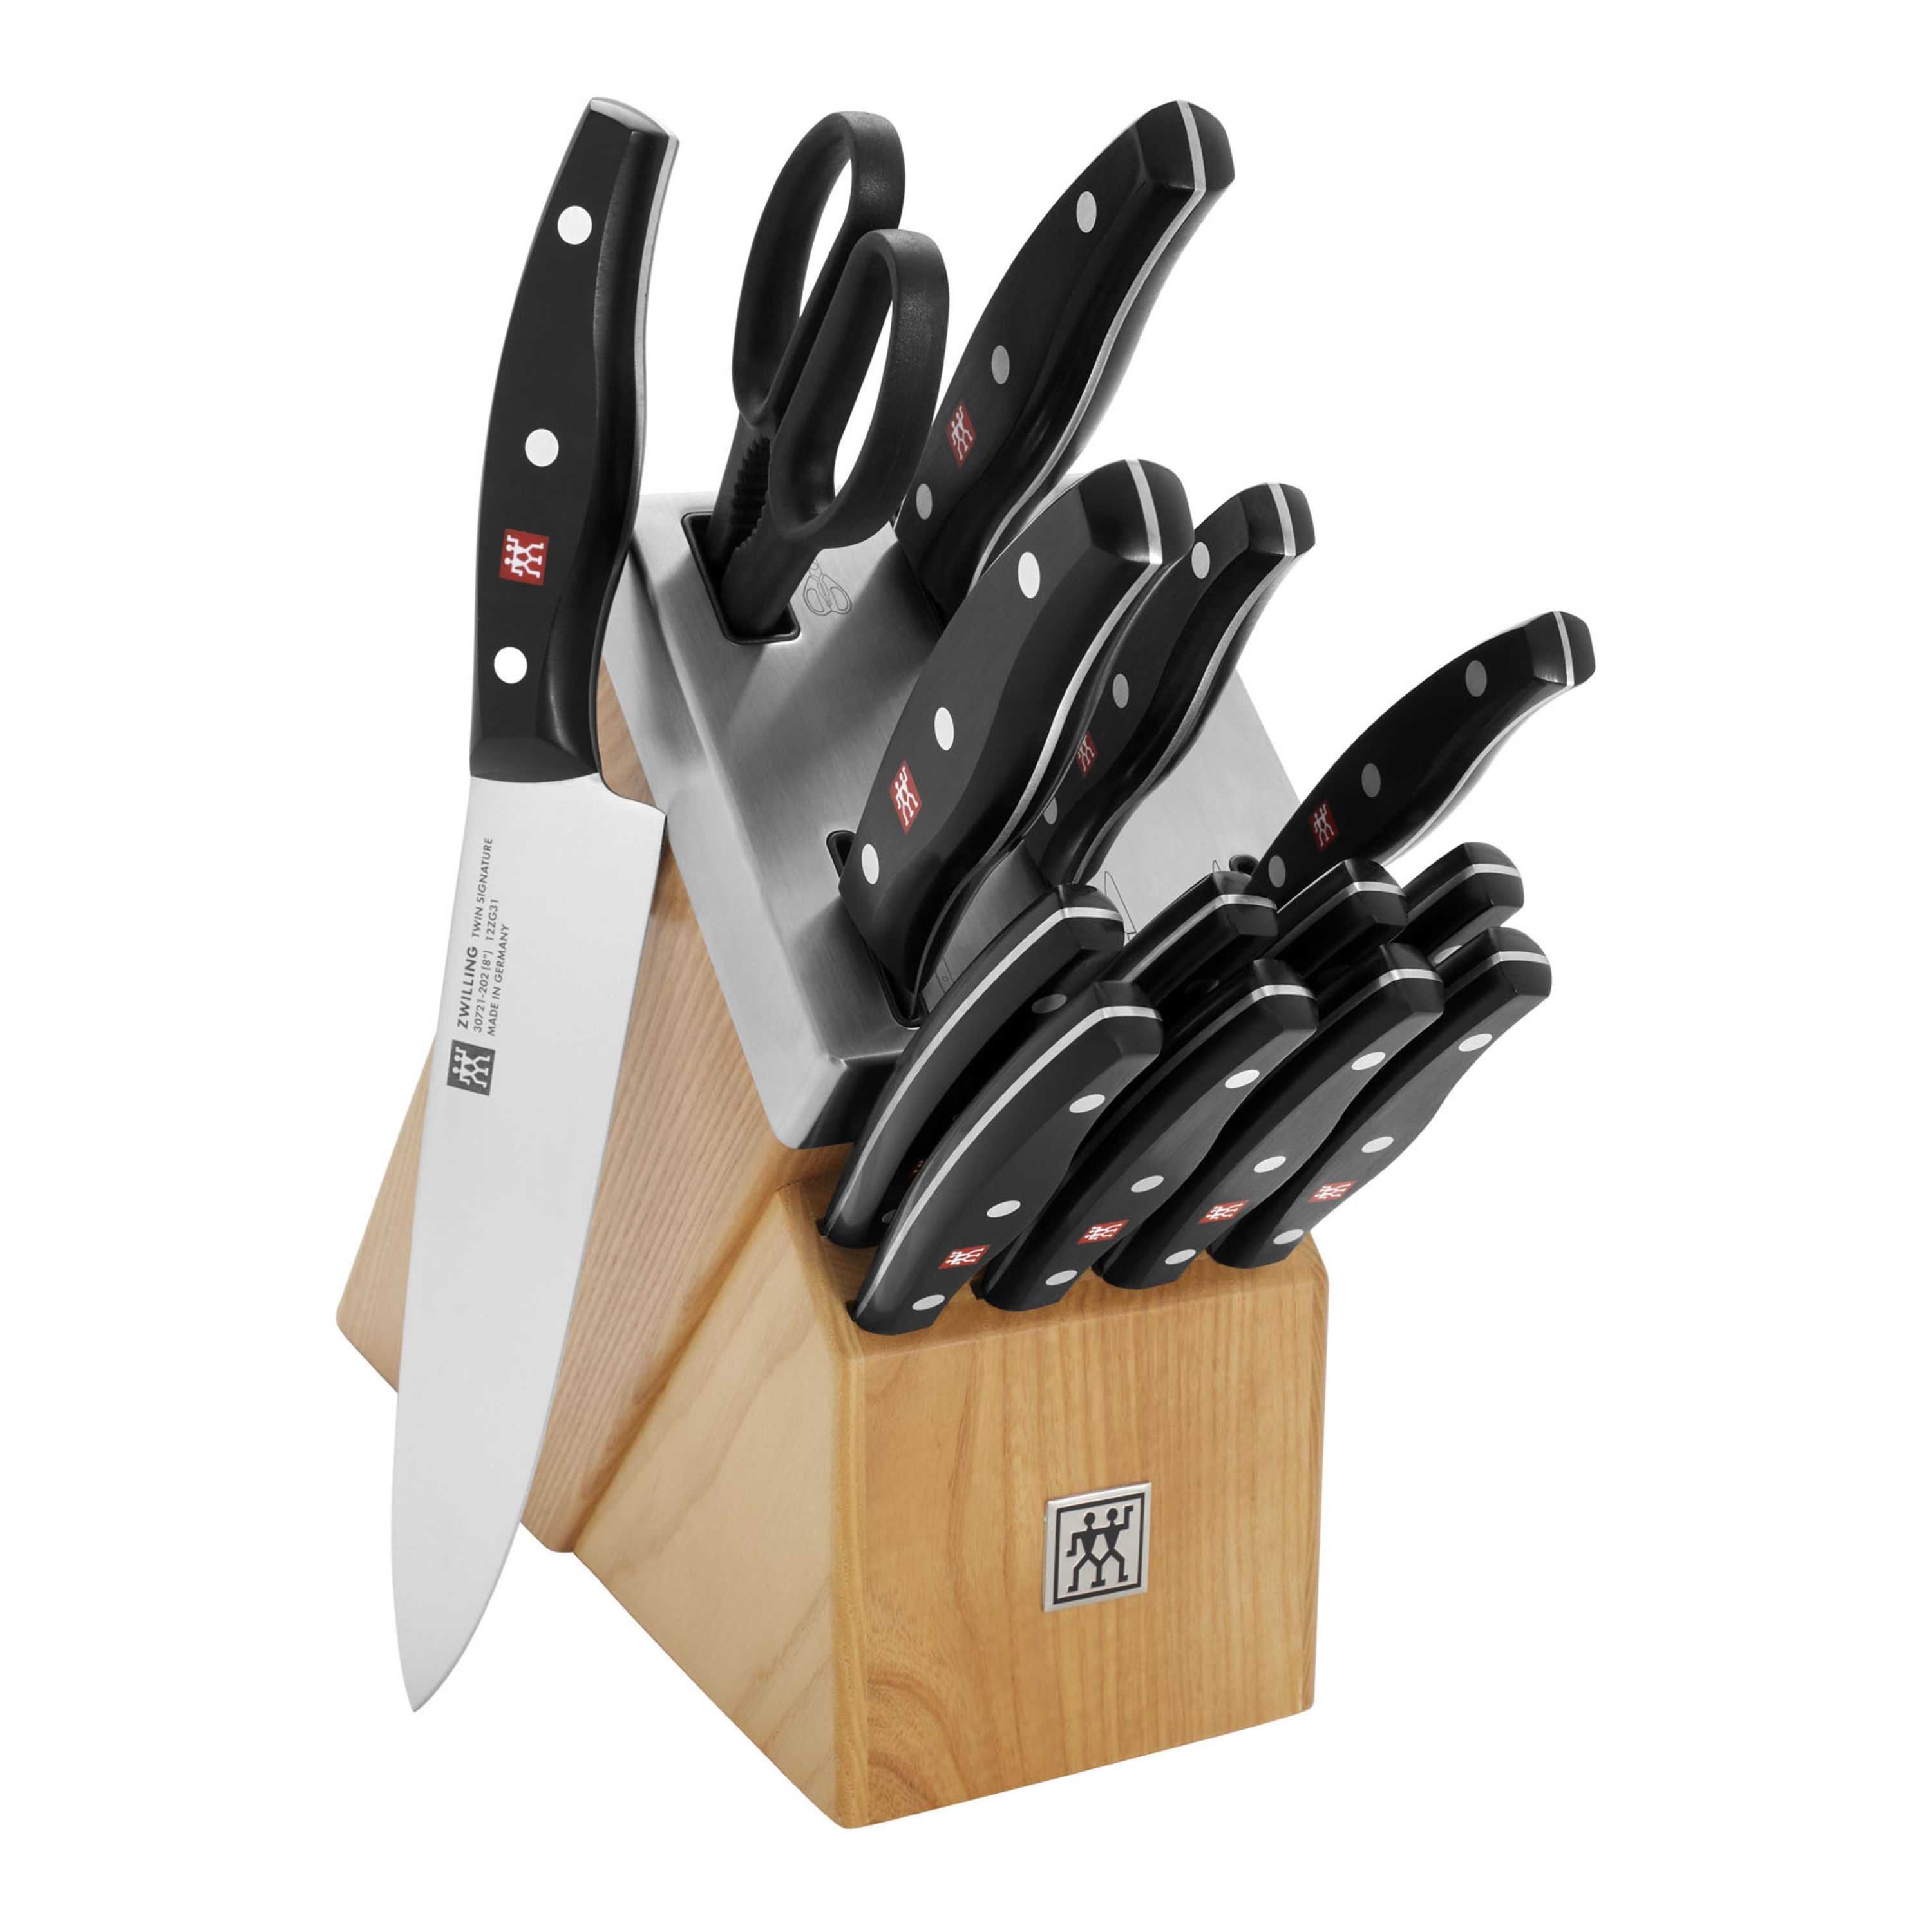 Chop, dice and save $80 on this 2-piece Zwilling knife set - CNET